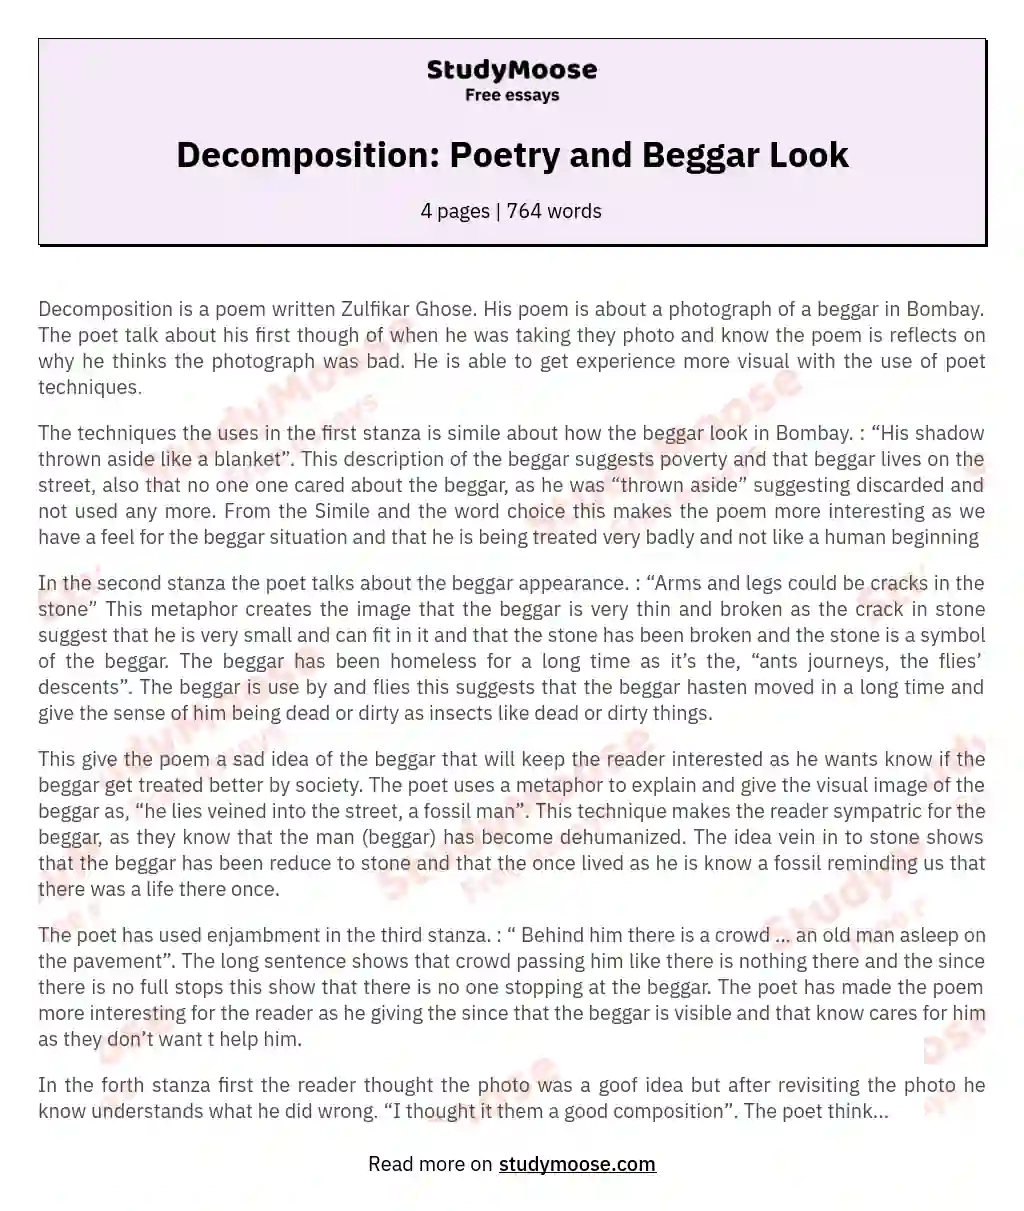 Decomposition: Poetry and Beggar Look essay